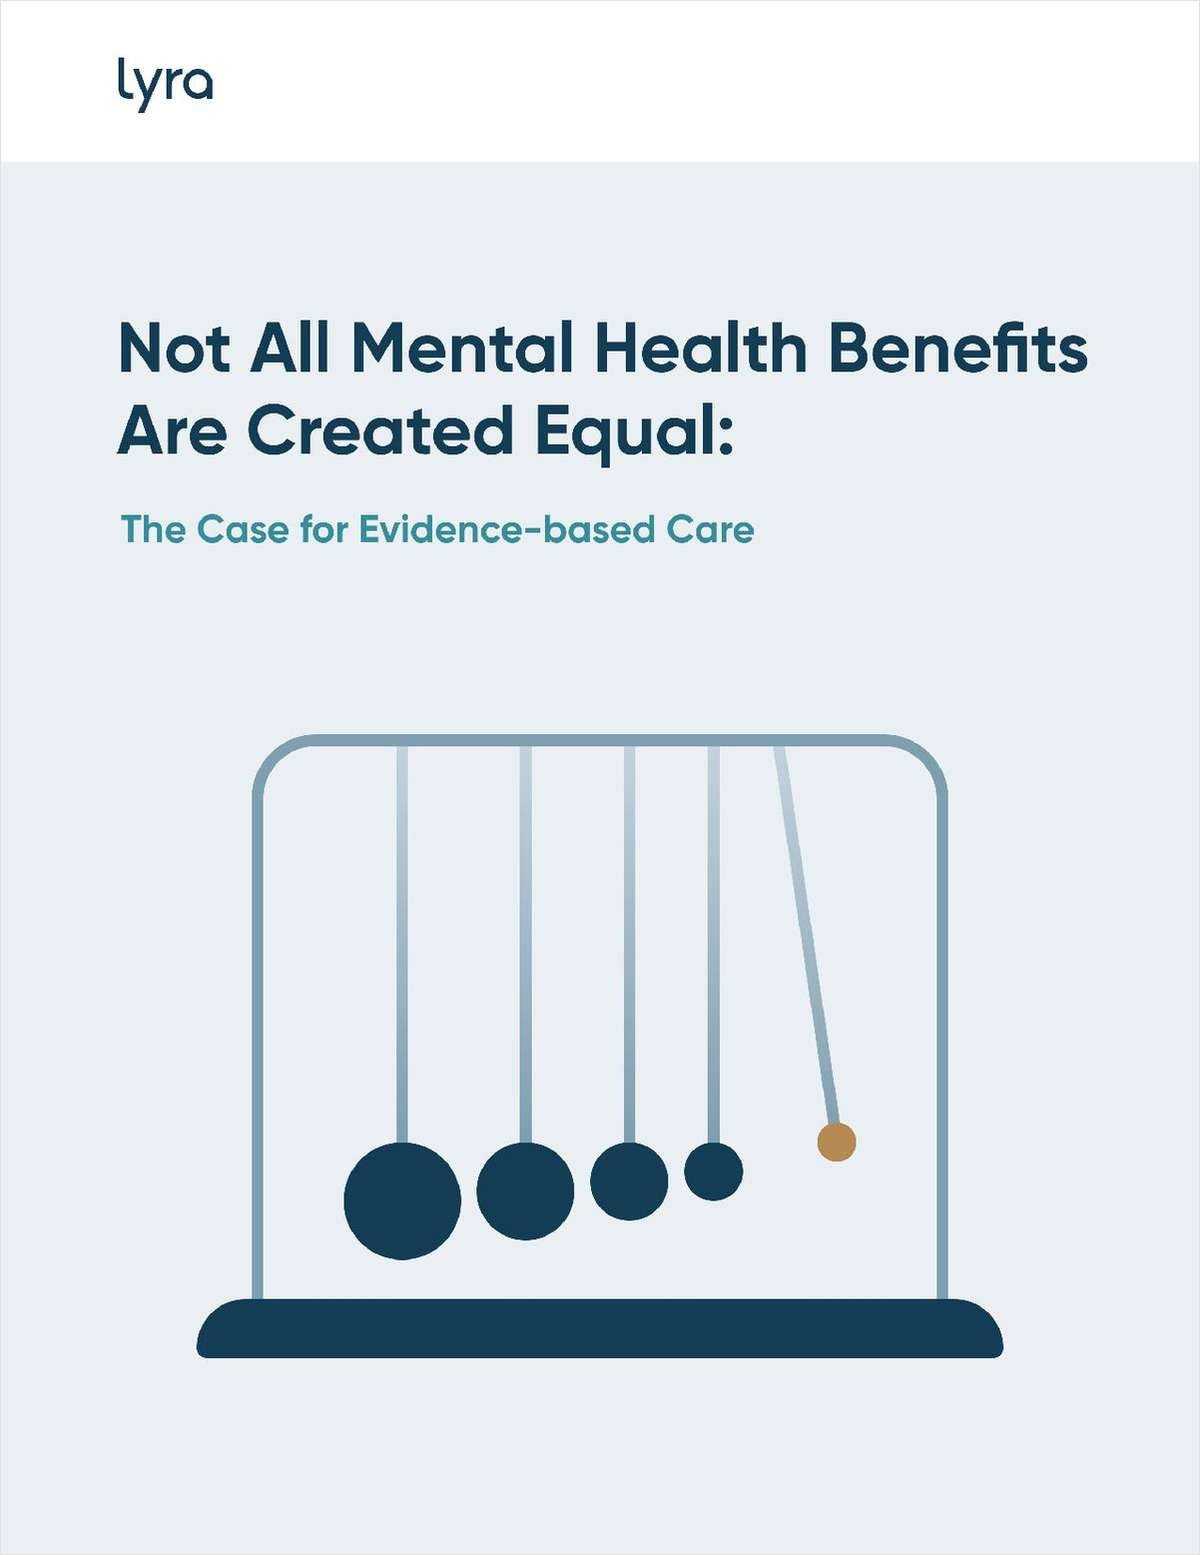 Not All Mental Health Benefits are Created Equal